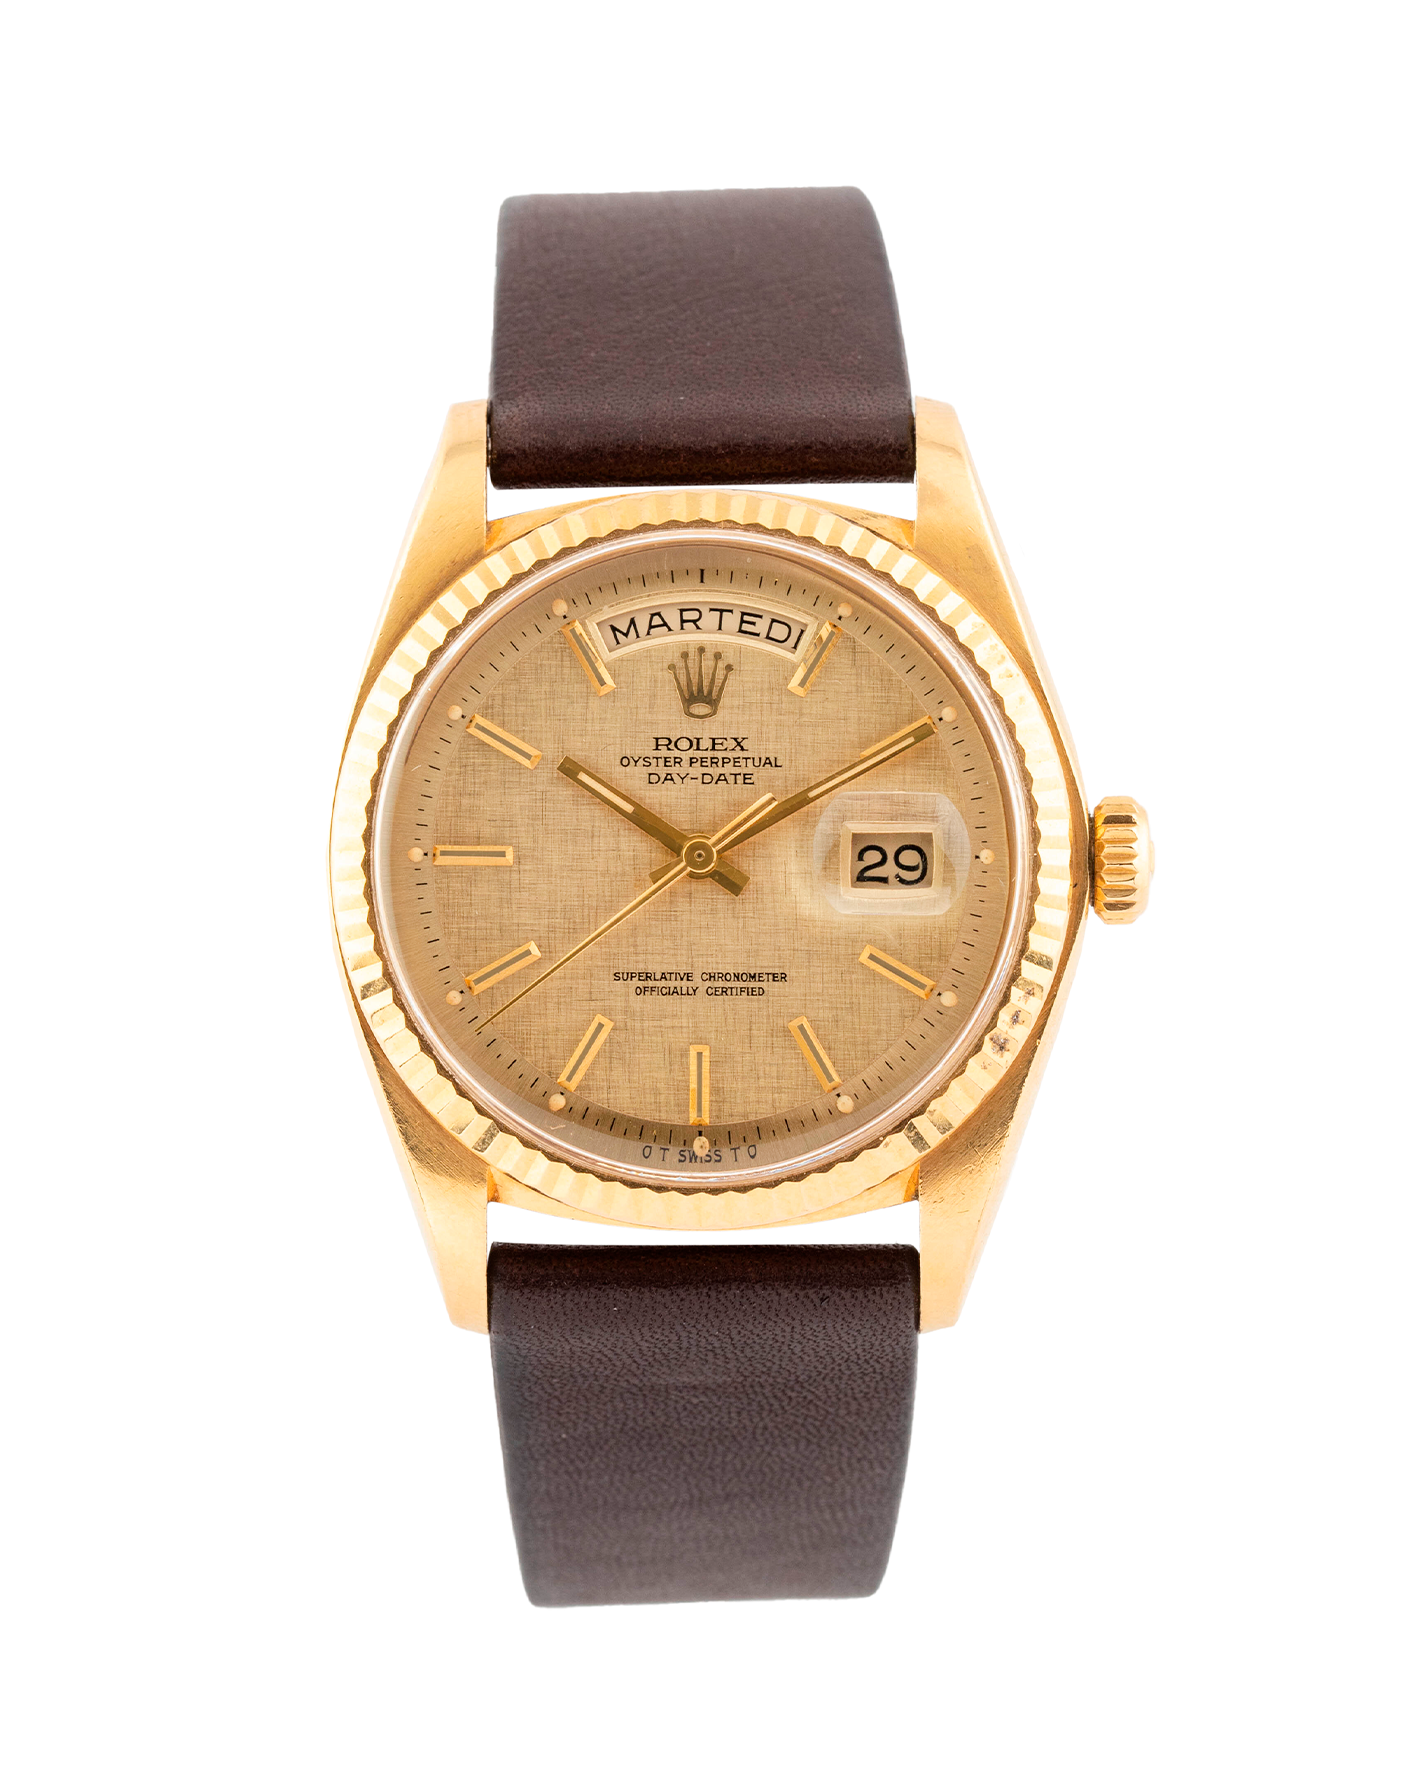 Rolex Ref. 1803 Oyster Perpetual Day-Date